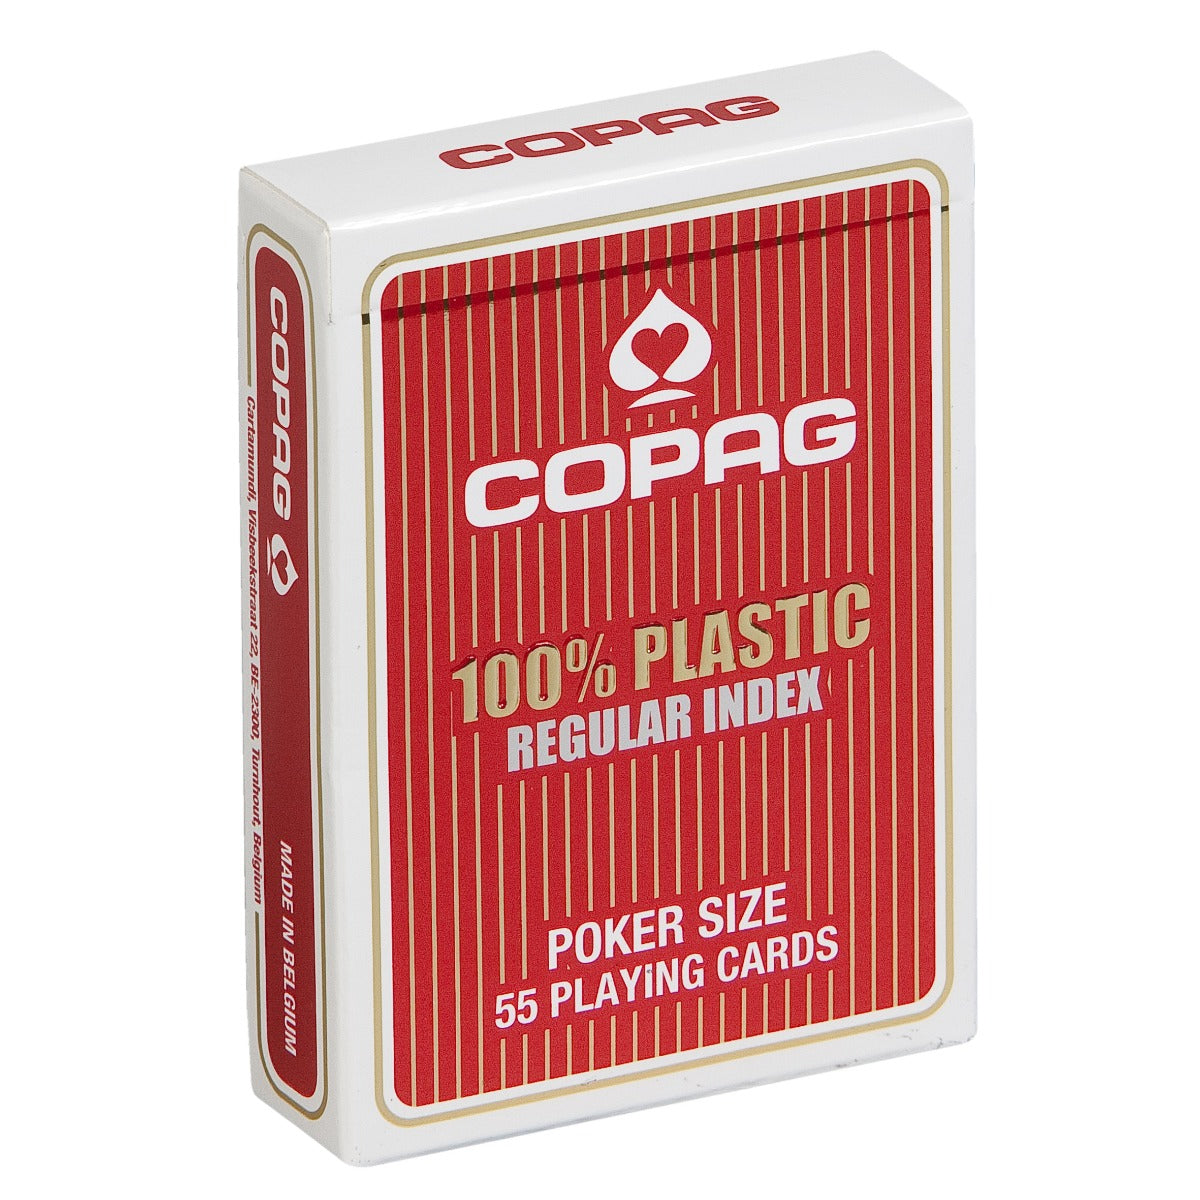 Copag Poker Regular Index Playing Cards - Red